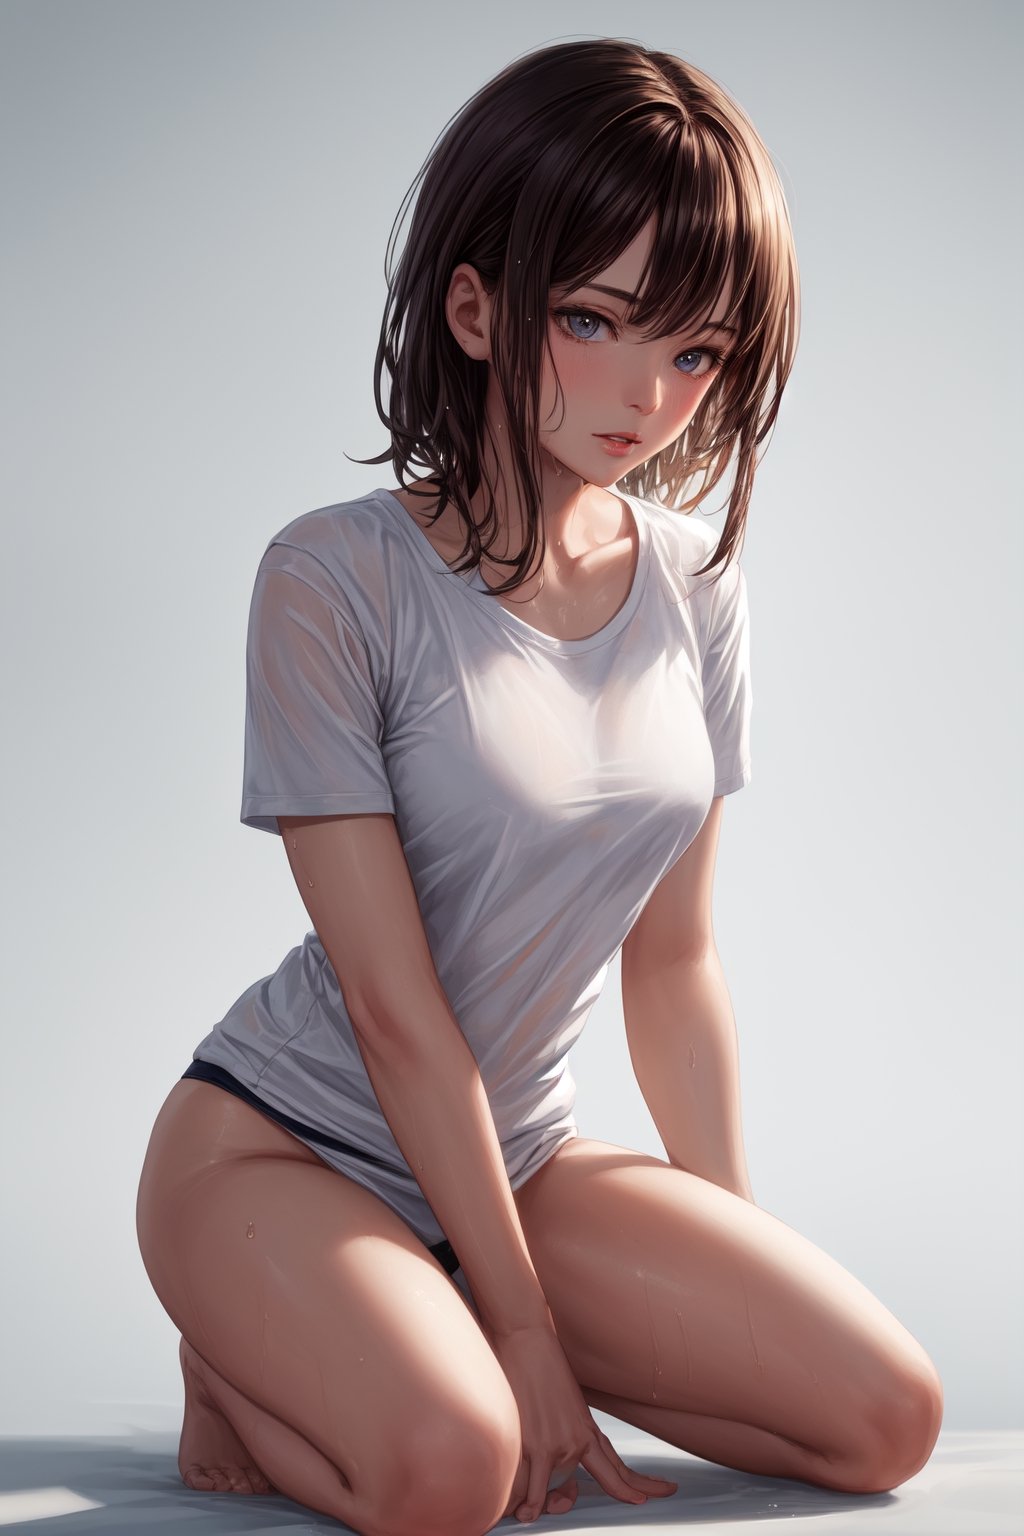 (Masterpiece), Diffuse light, Dynamic shadows, Sharp focus, Realistic, Detailed, High resolution, Absurd, White background, Small breasts, Looking to the side, T-shirt, No bra, Photorealistic, Lifelike, Wet, lips parted, (submissive kneeling), girl